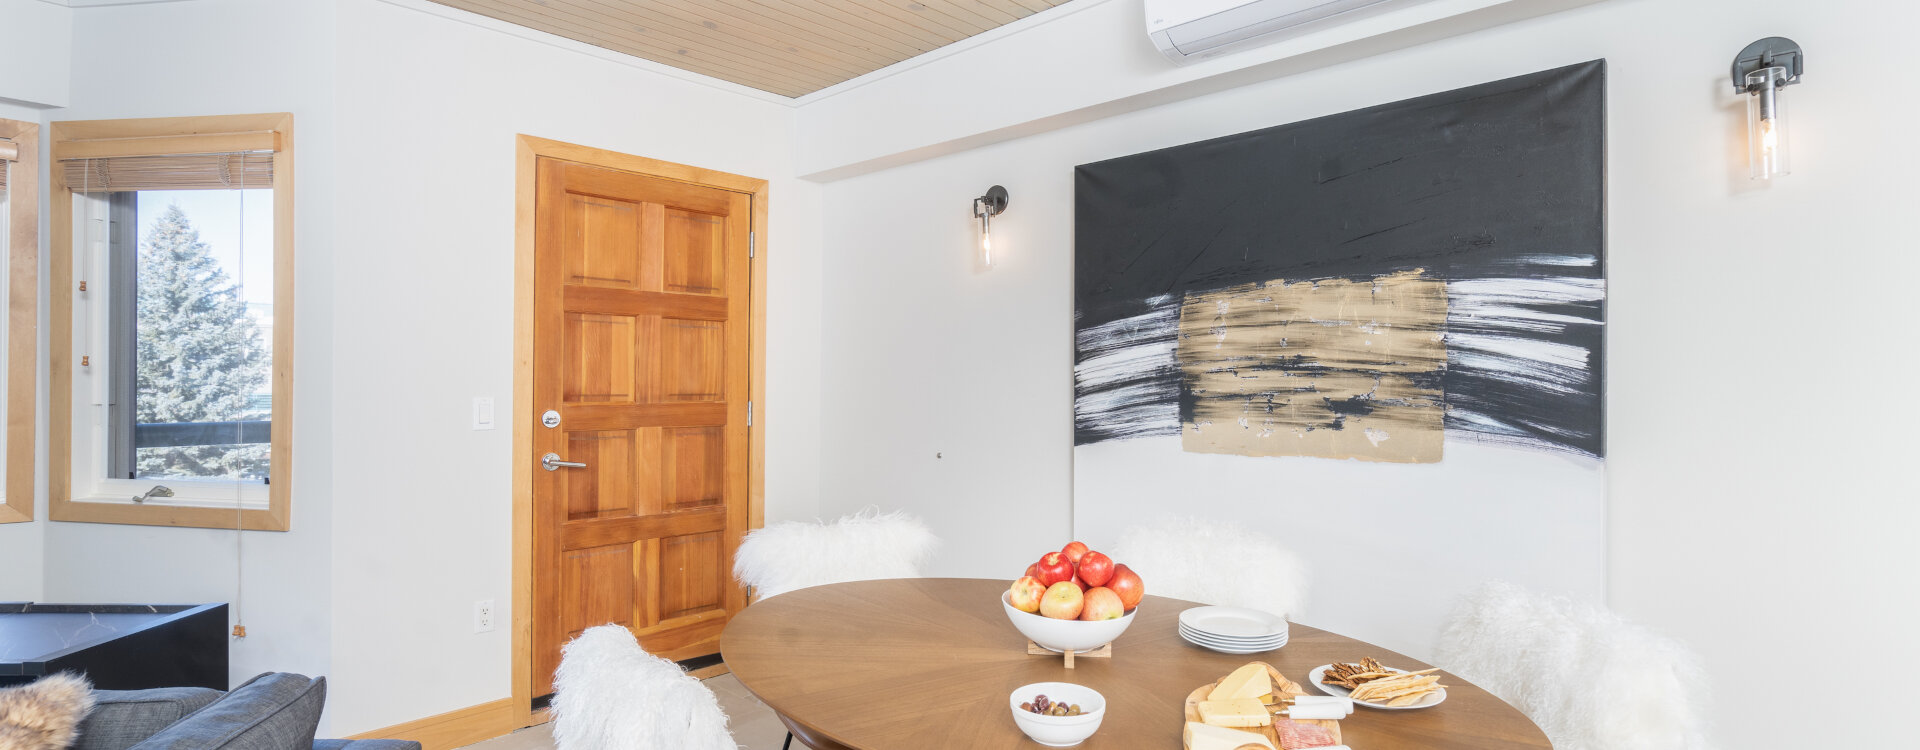 2.01-Telluride-Vacation-Rental-Ice-House-305-Dining-Area